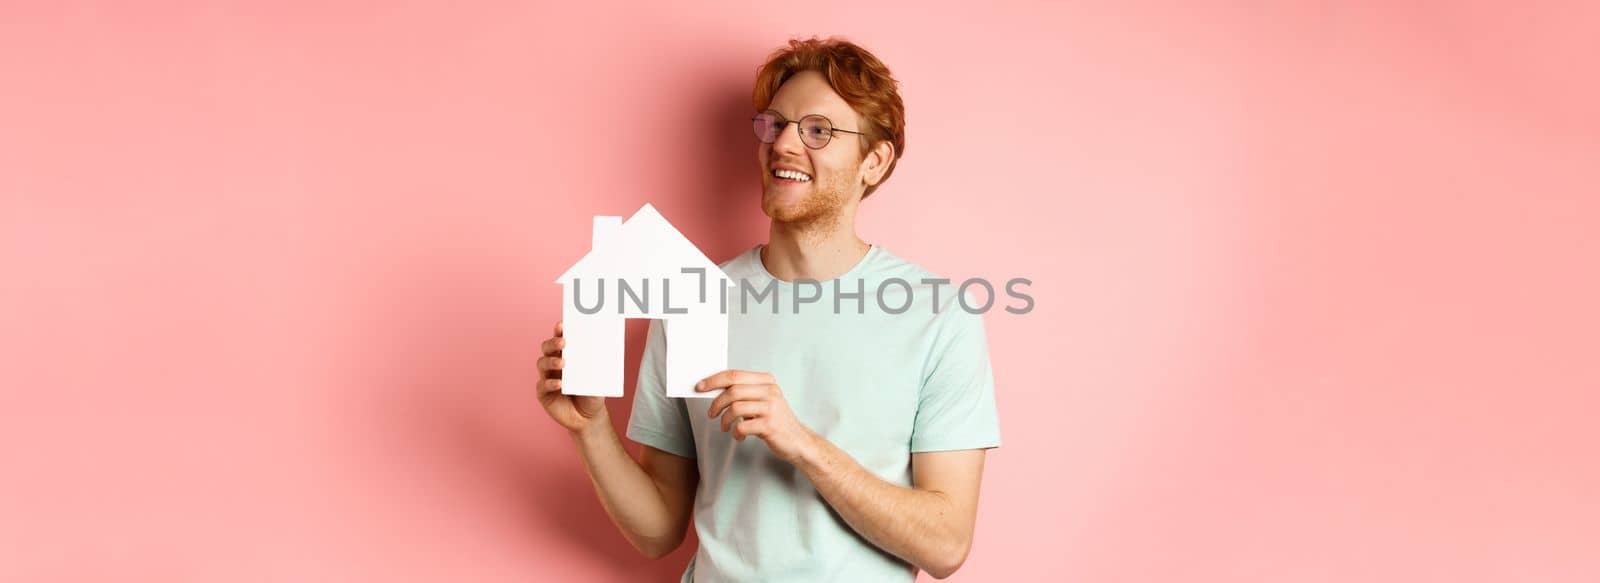 Real estate. Happy redhead man dreaming of buying property, looking right and showing paper house cutout, standing over pink background.